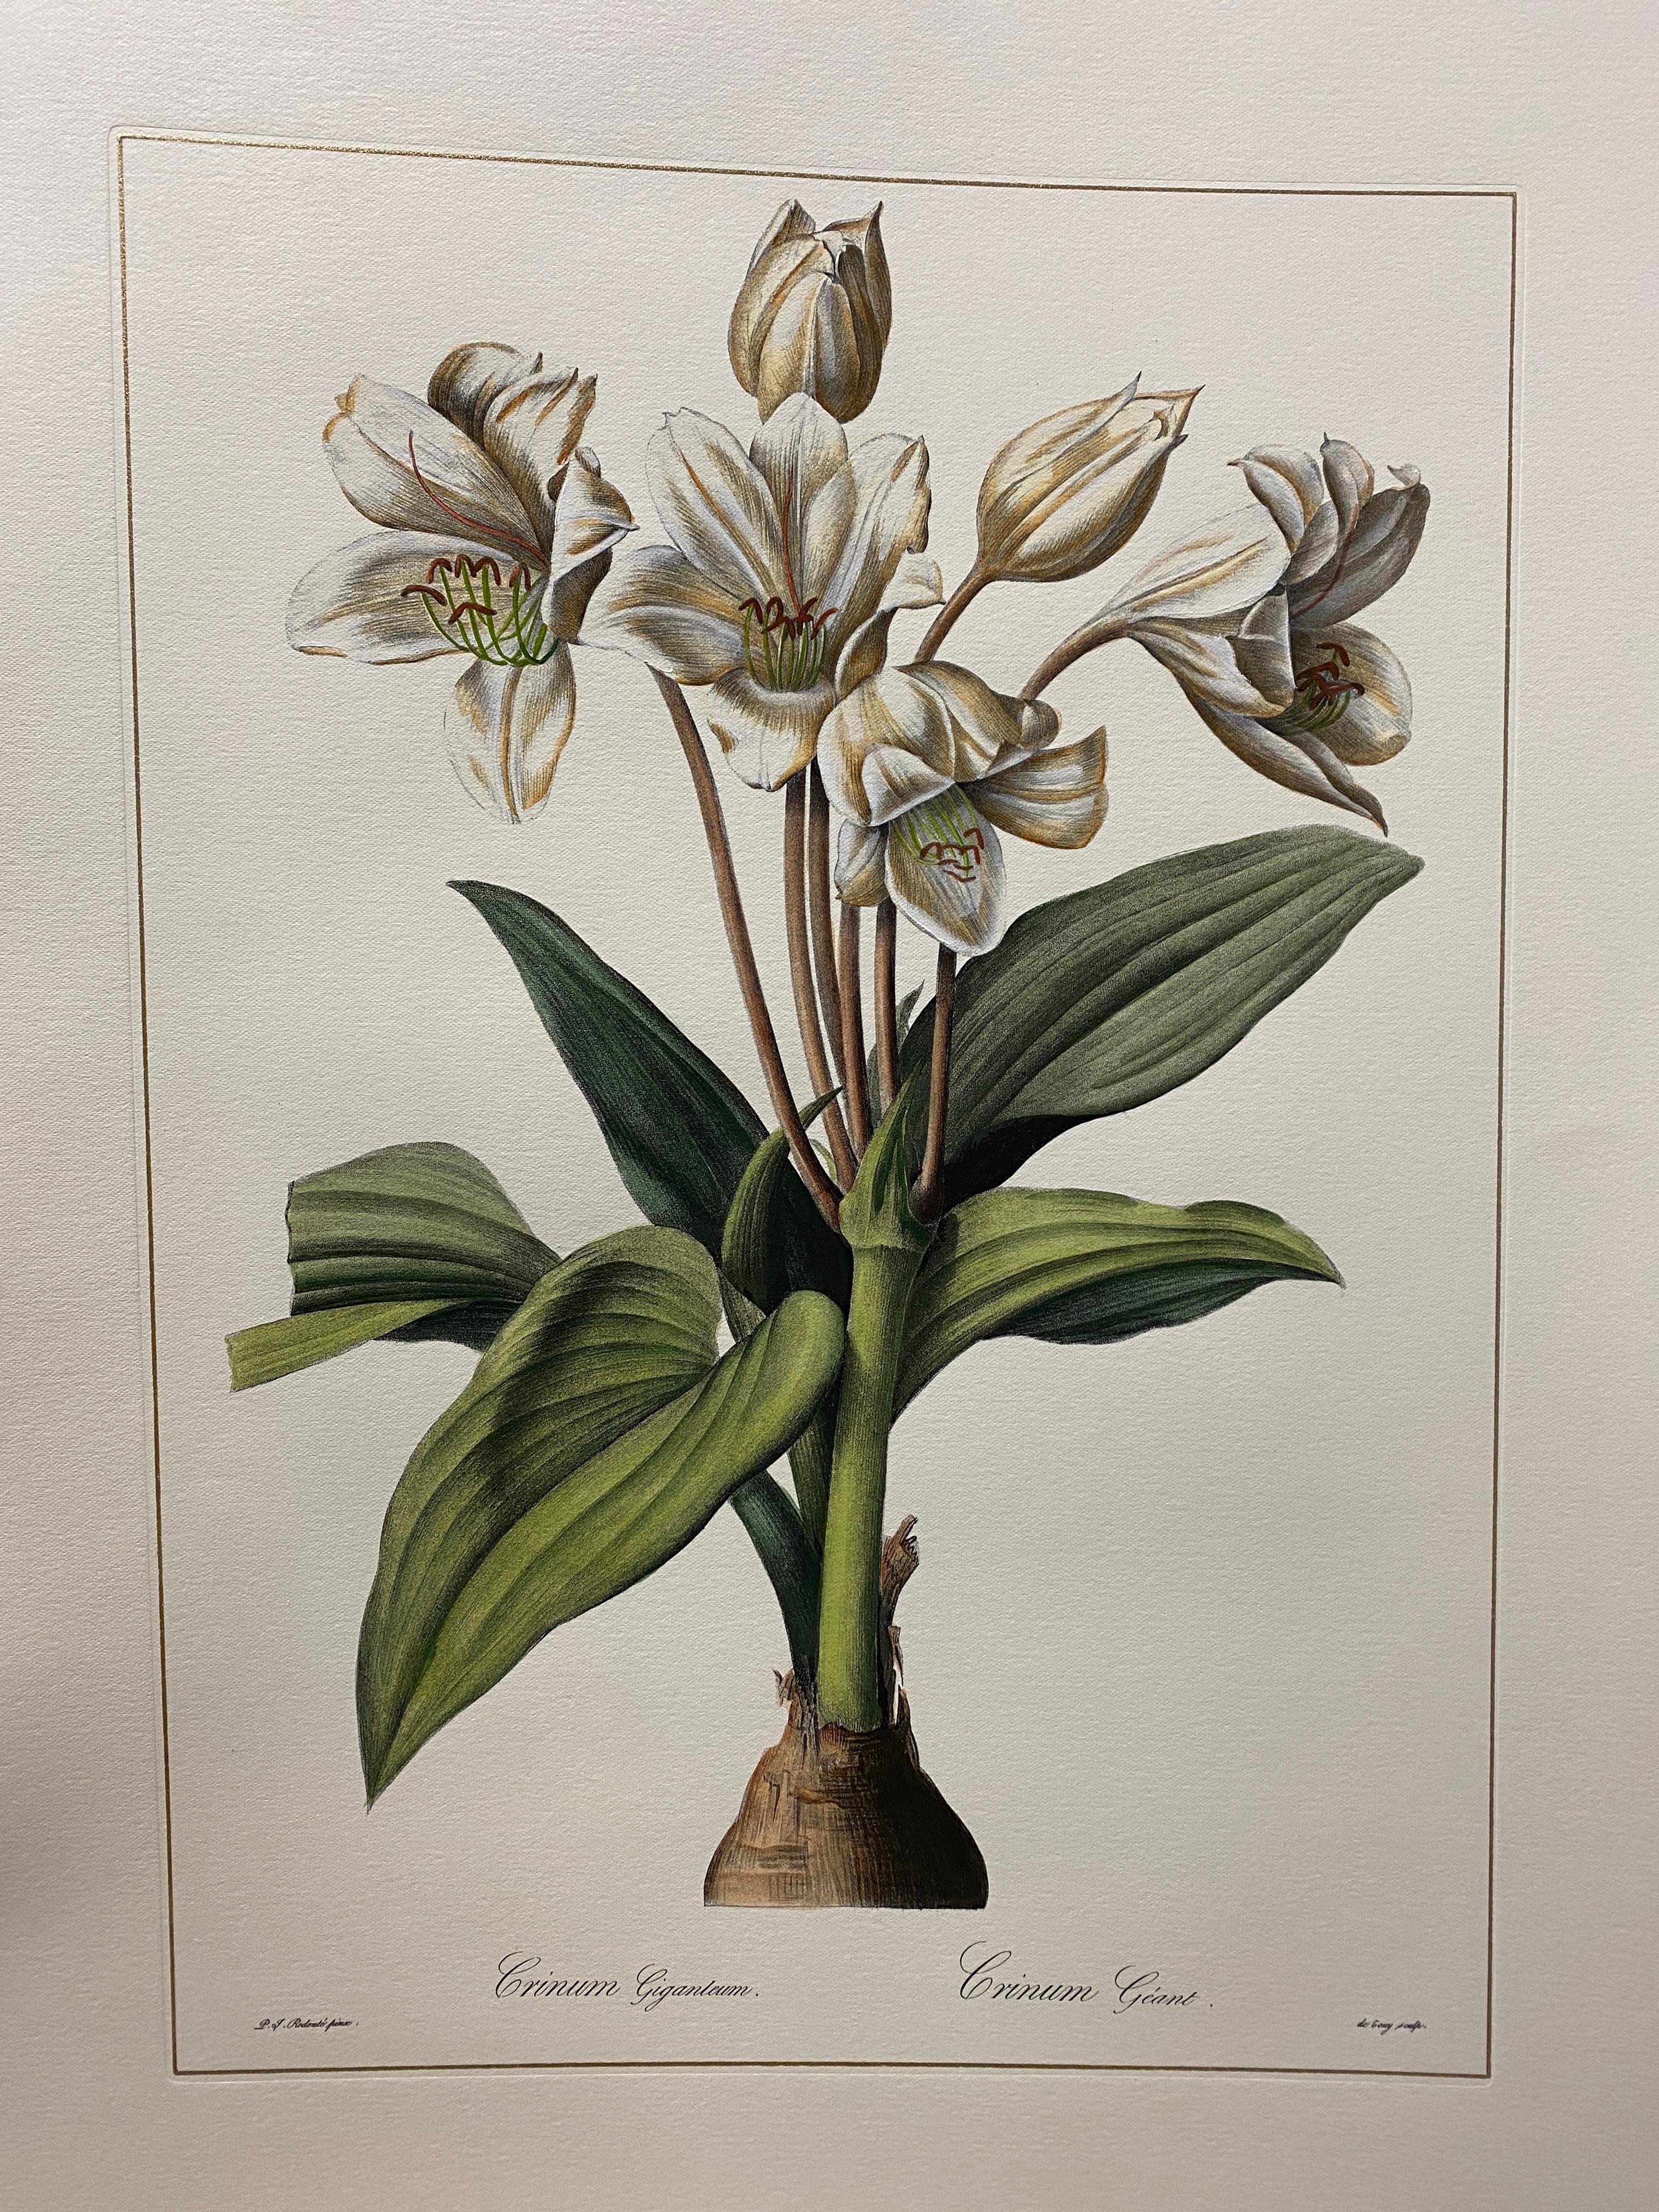 Print from the Collection Botanique representing Crinum Gigantum, with a beautiful wooden frame enriched with a jute passpartout, which brings out colors and nuances of watercolor colors.

Another different Crinum prints are available to create a